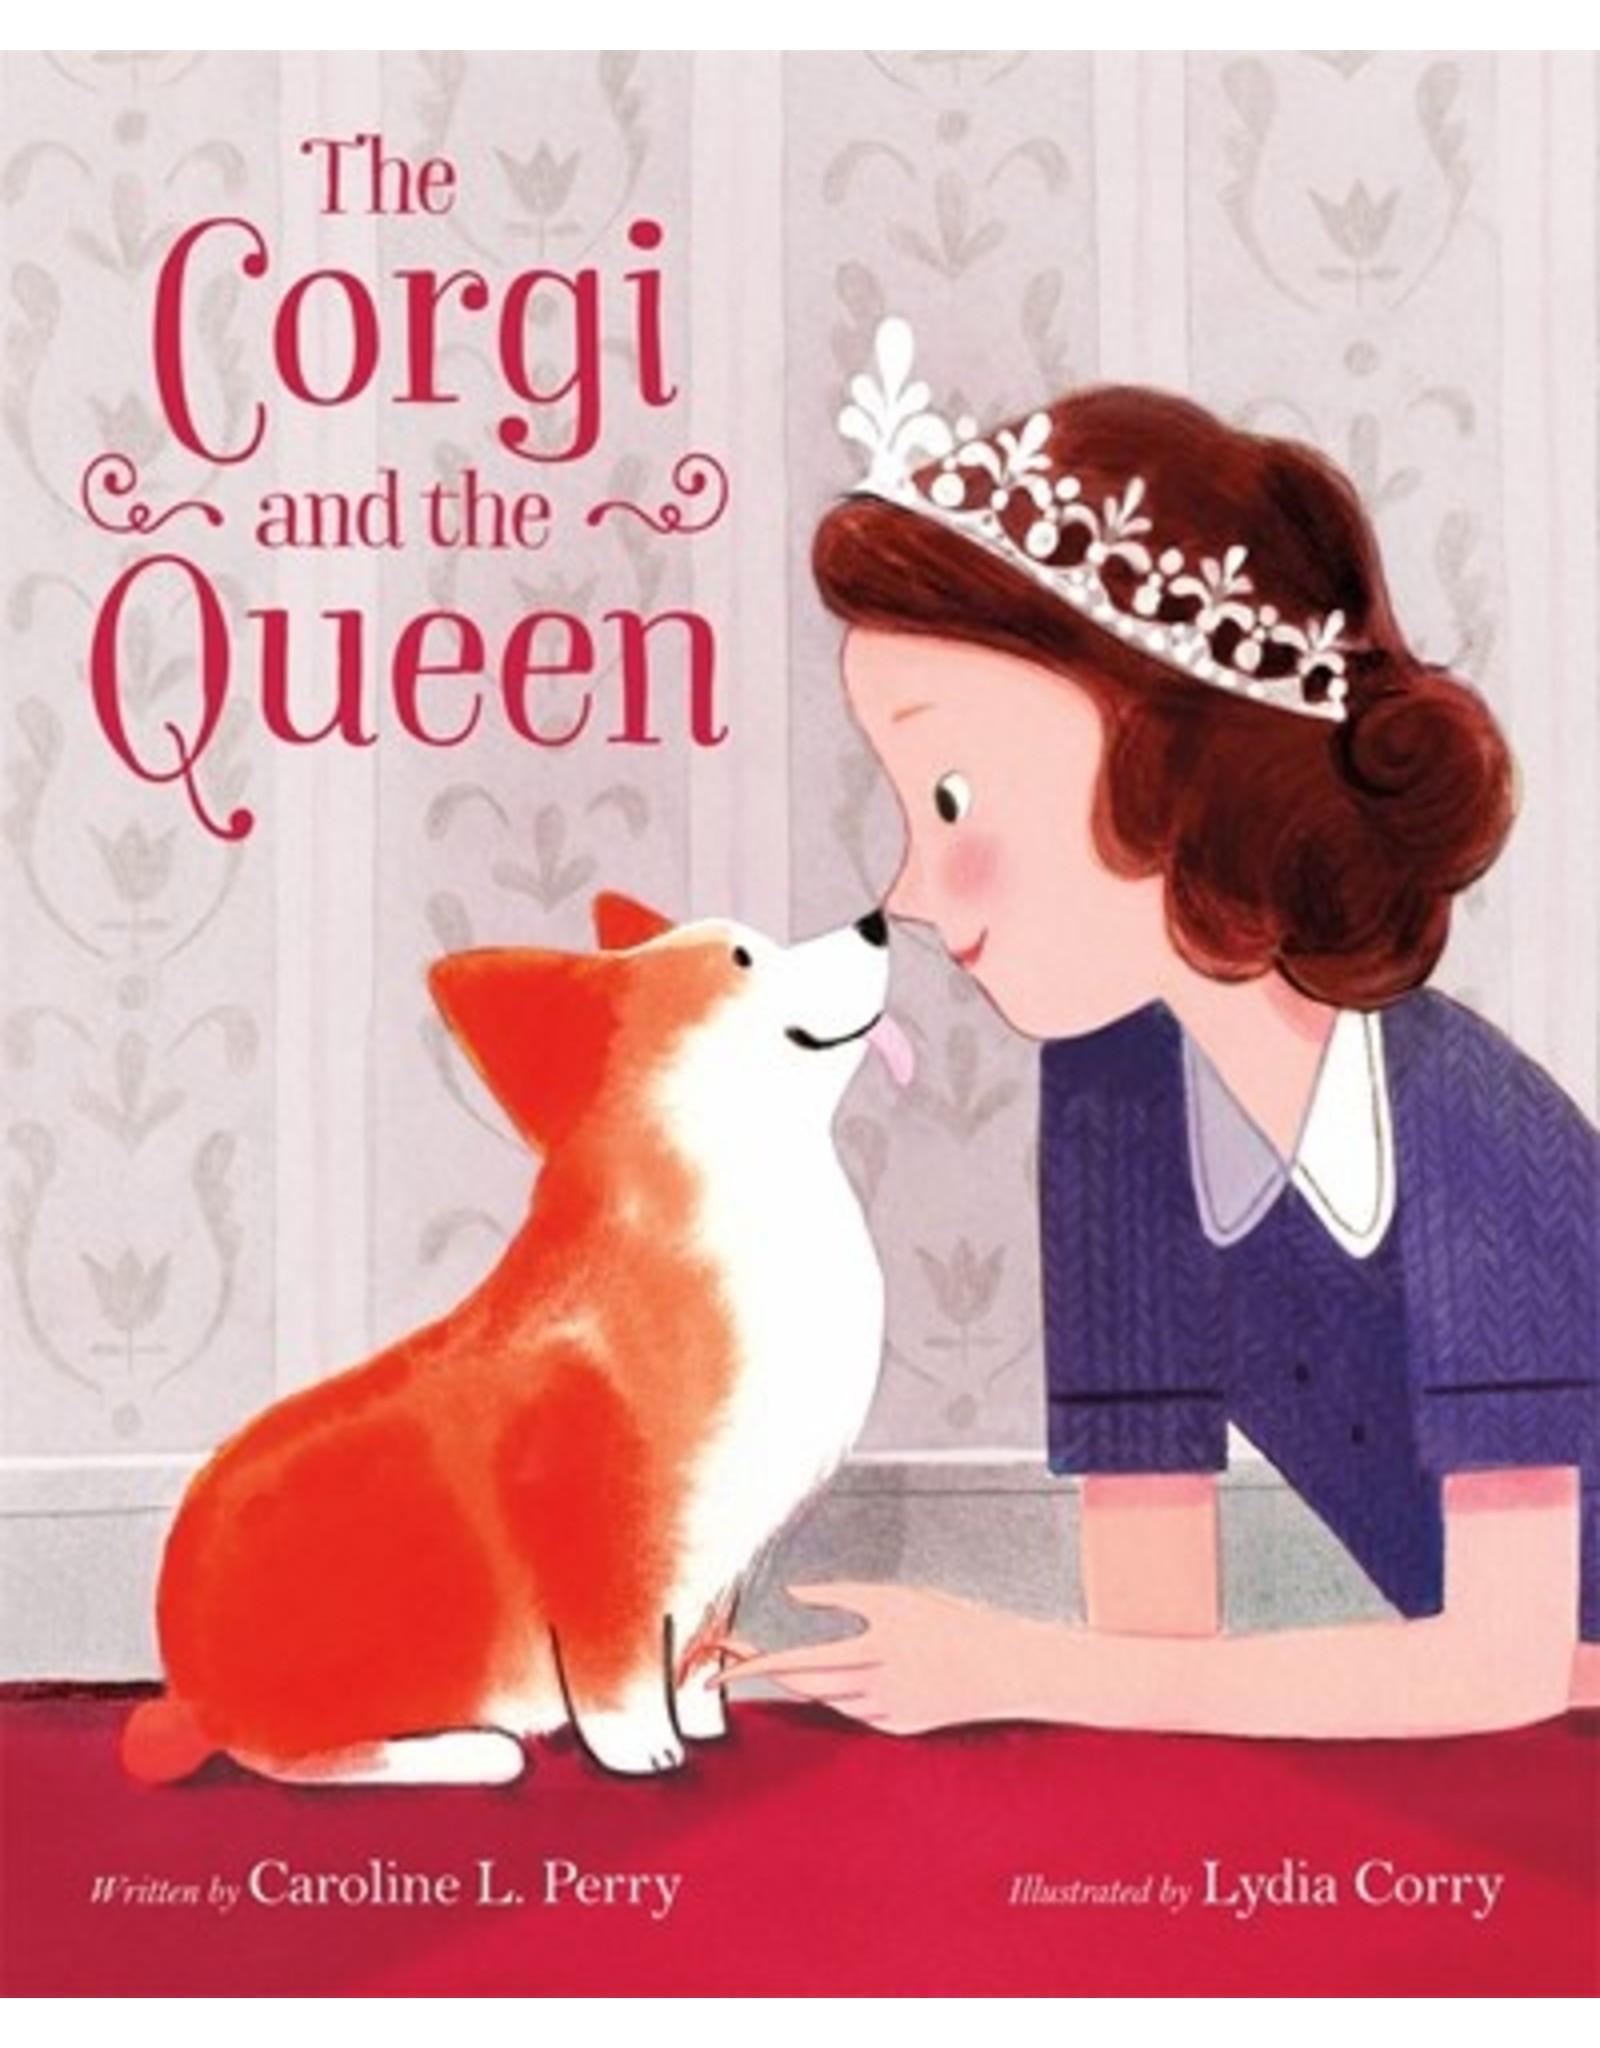 Books The Corgi and the Queen  written by Caroline L. Perry  Illustrated by Lydia Corry